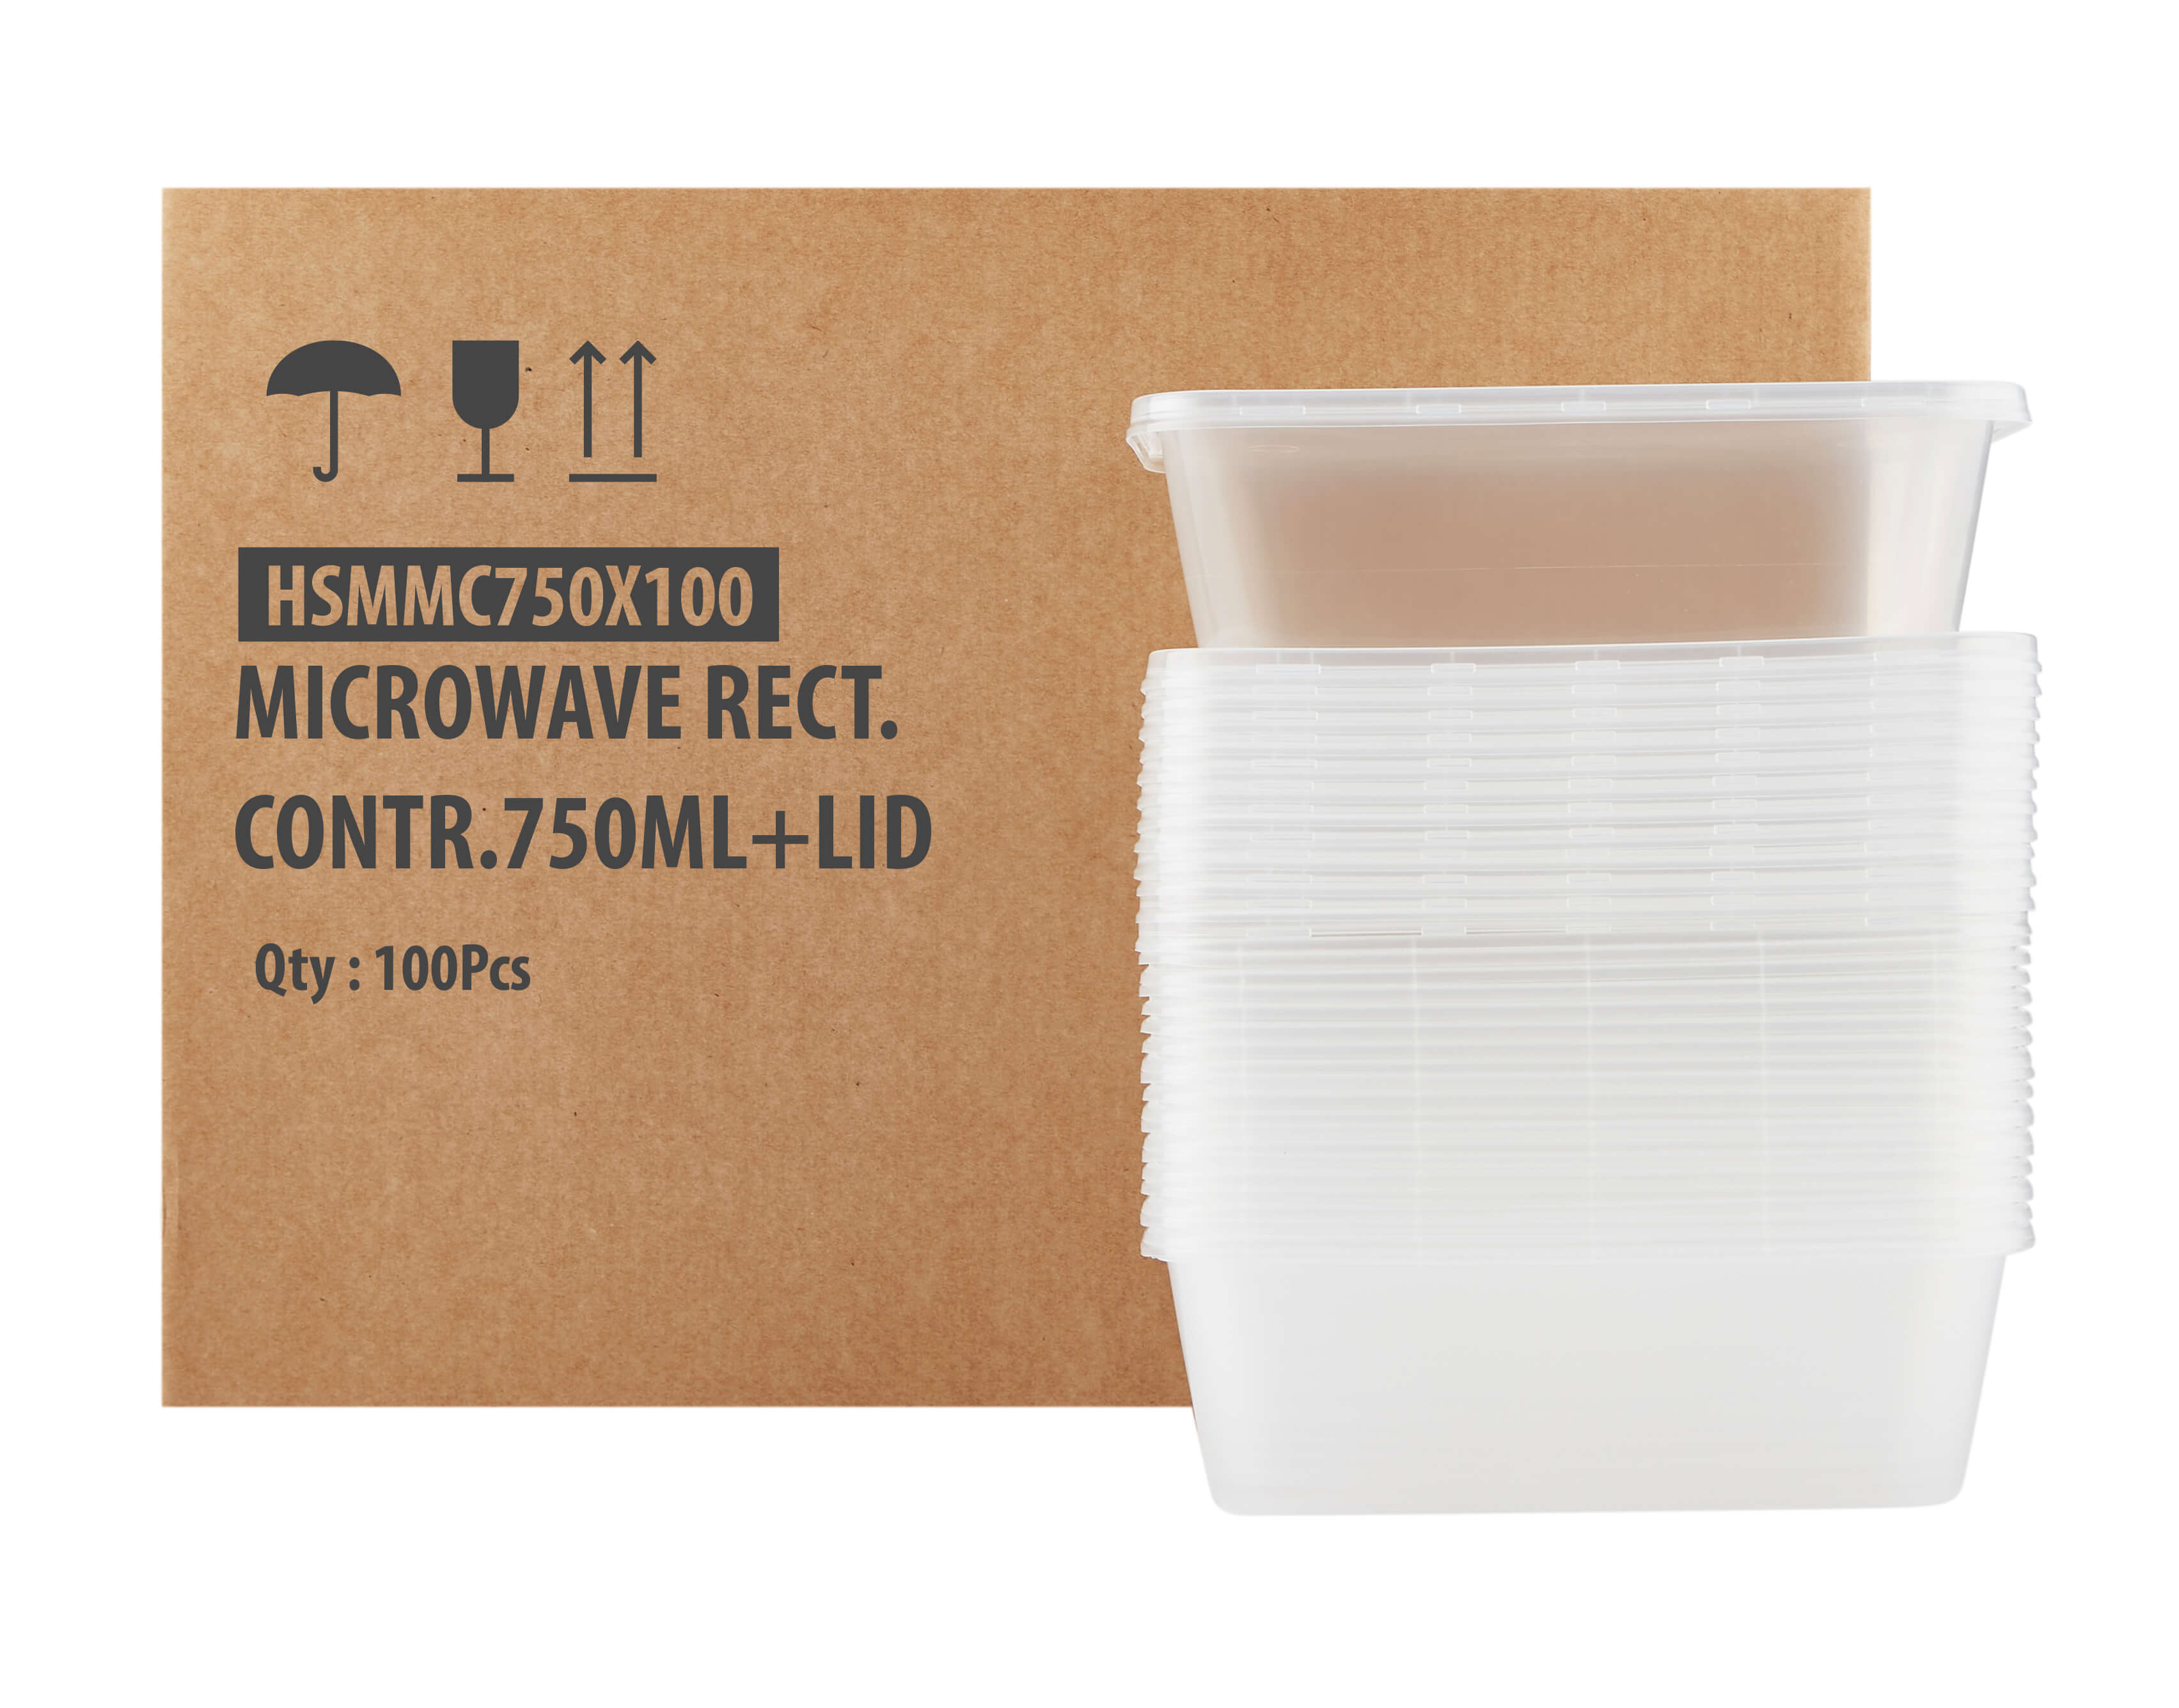 750ml microwave container with lid - Hotpack Global